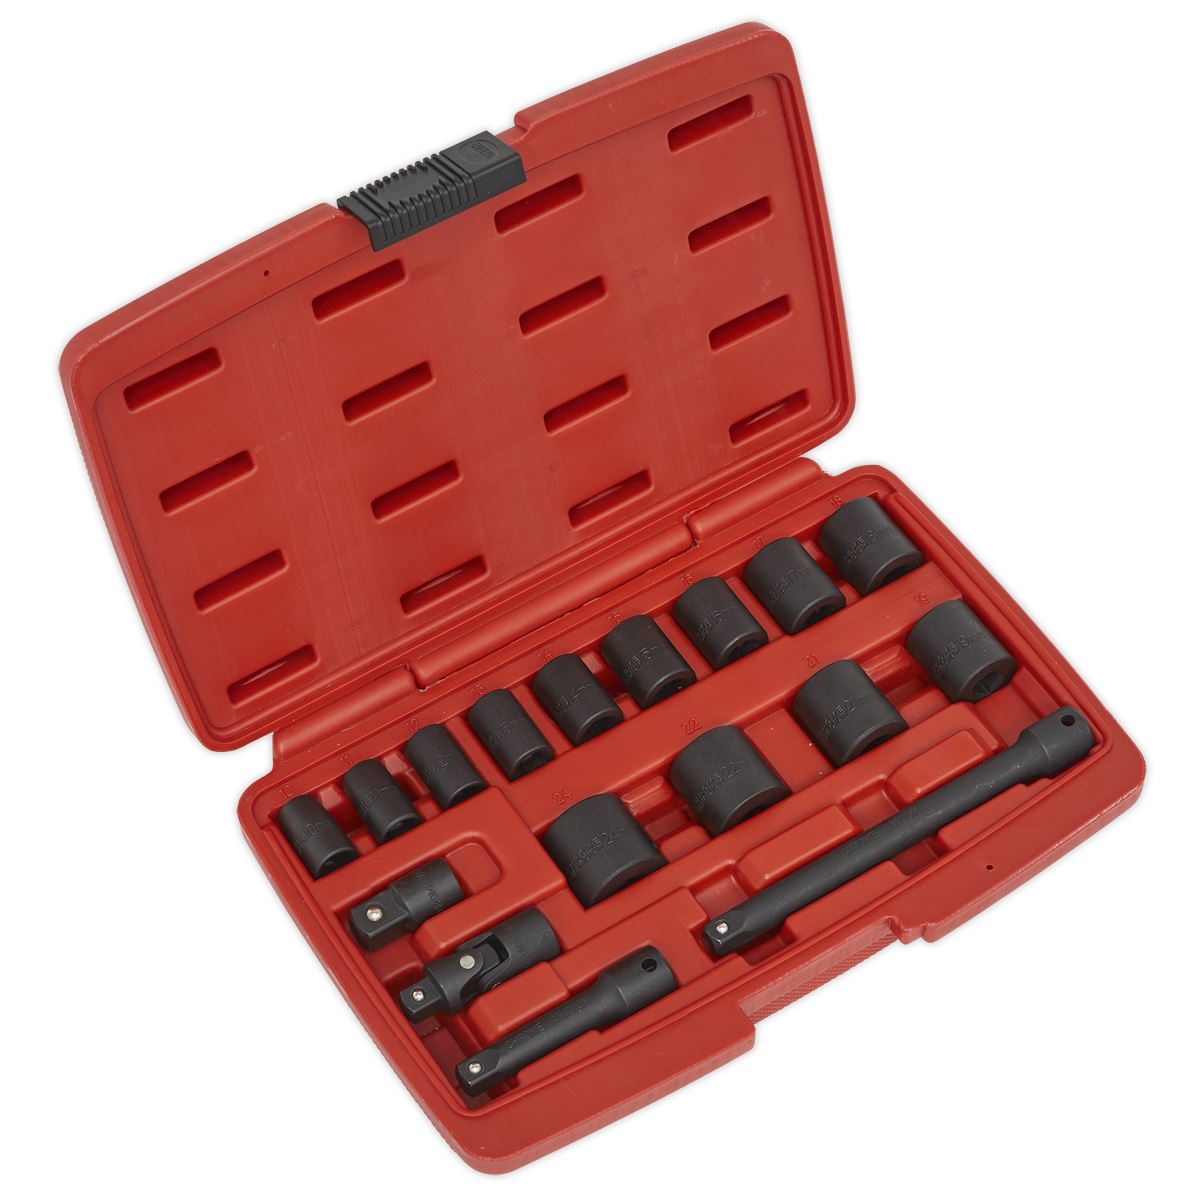 Sealey 17 Piece 3/8"Sq Drive Metric Impact Socket Set With Case